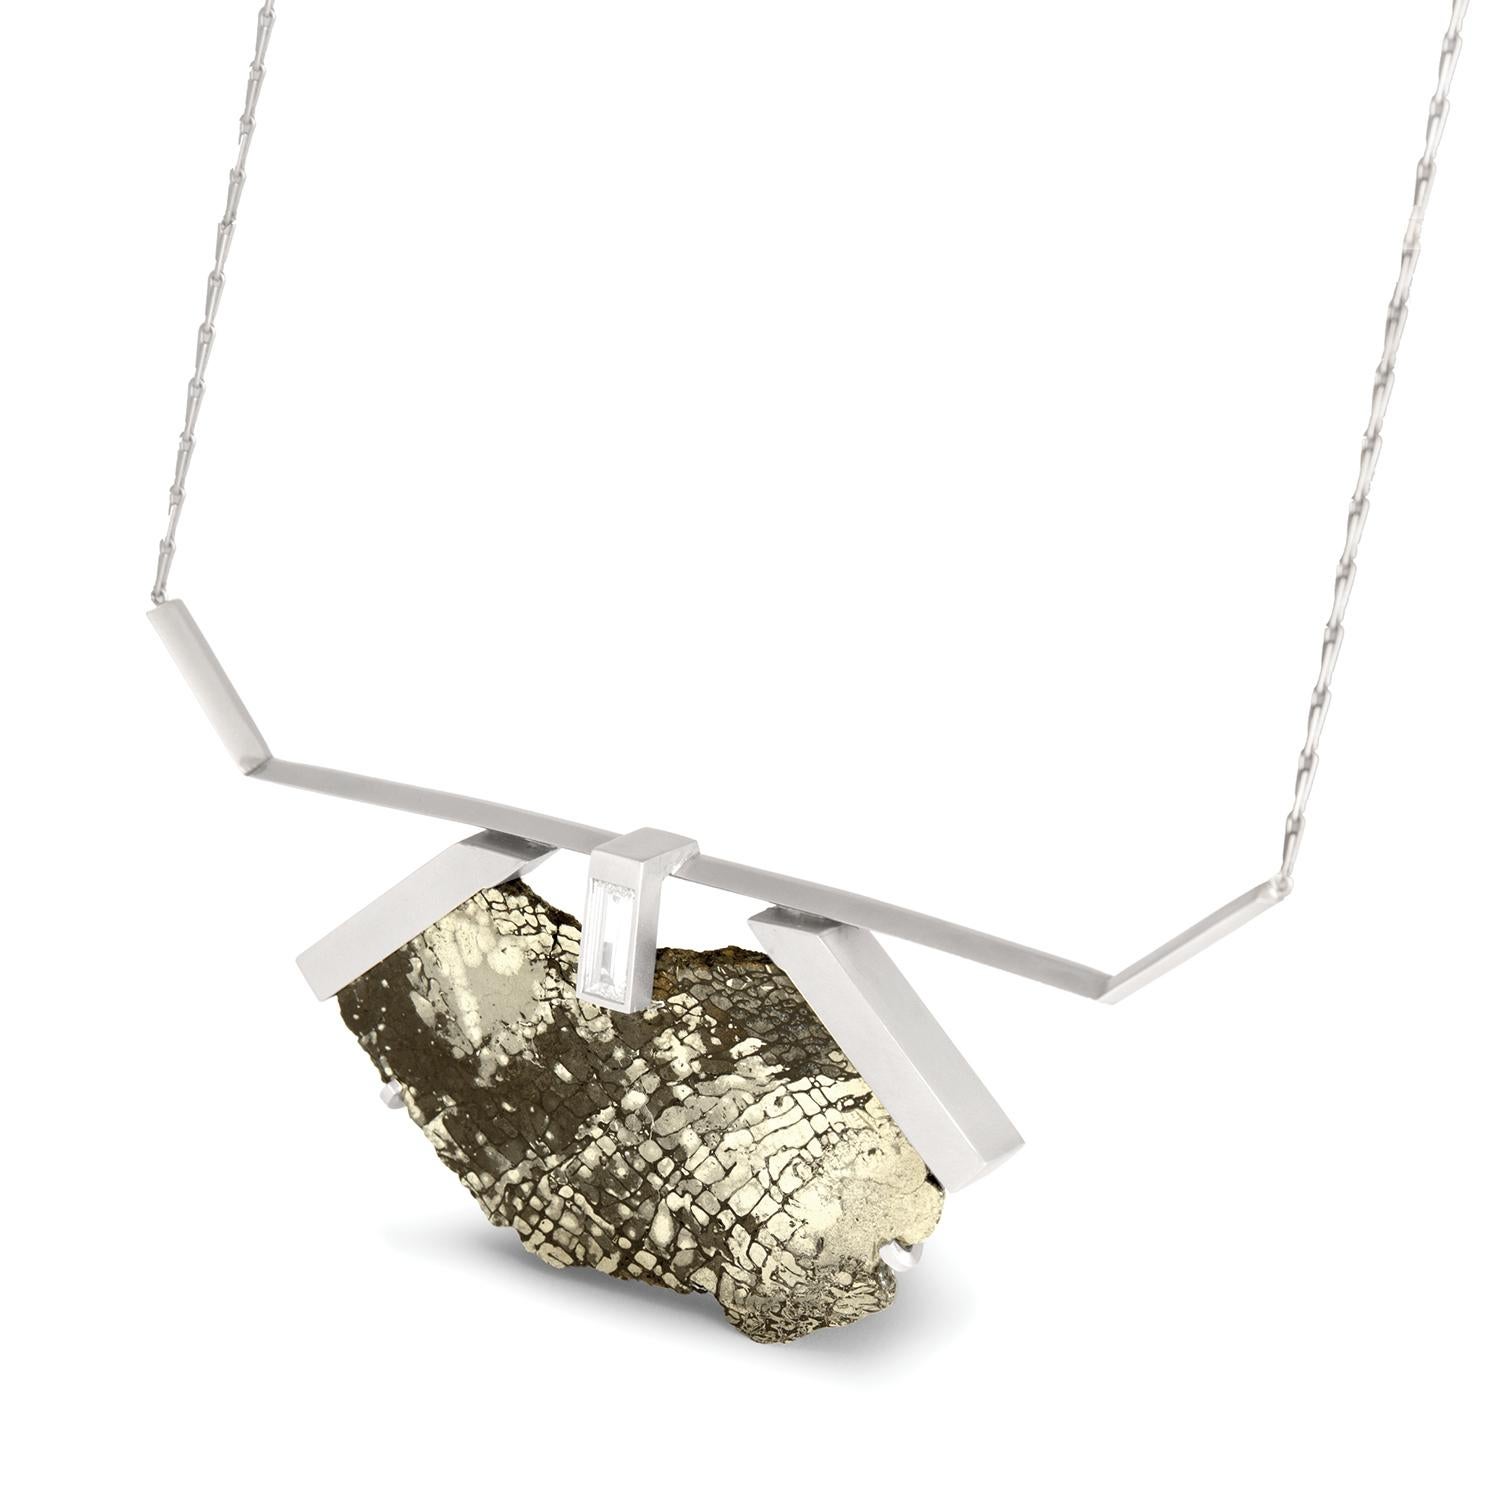 1.43 carat white rectangular step cut diamond and pyritized dinosaur bone vertebra suspension necklace, recycled platinum, 1.43 TCW  - One-of-a-kind

A natural vertebra specimen of lucent pyritized dinosaur bone with raw edges is juxtaposed against